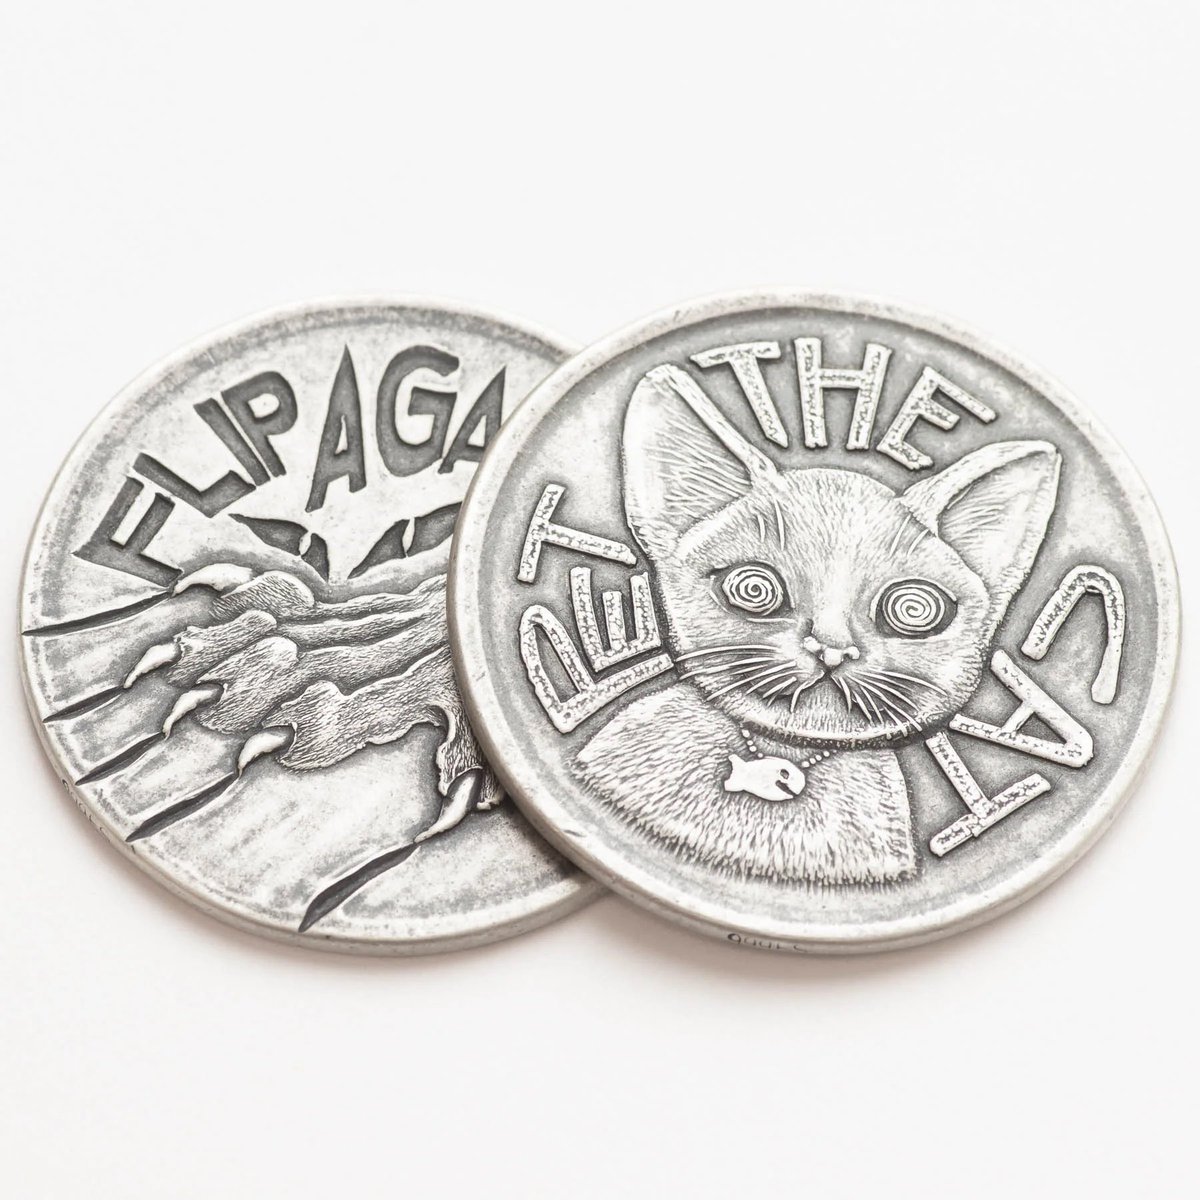 My cat is infuriated @MontayBayBay declined to use her design for the latest coin 🪙. However since she is an extreme russophobe she has decided to endorse this incredible new coin.